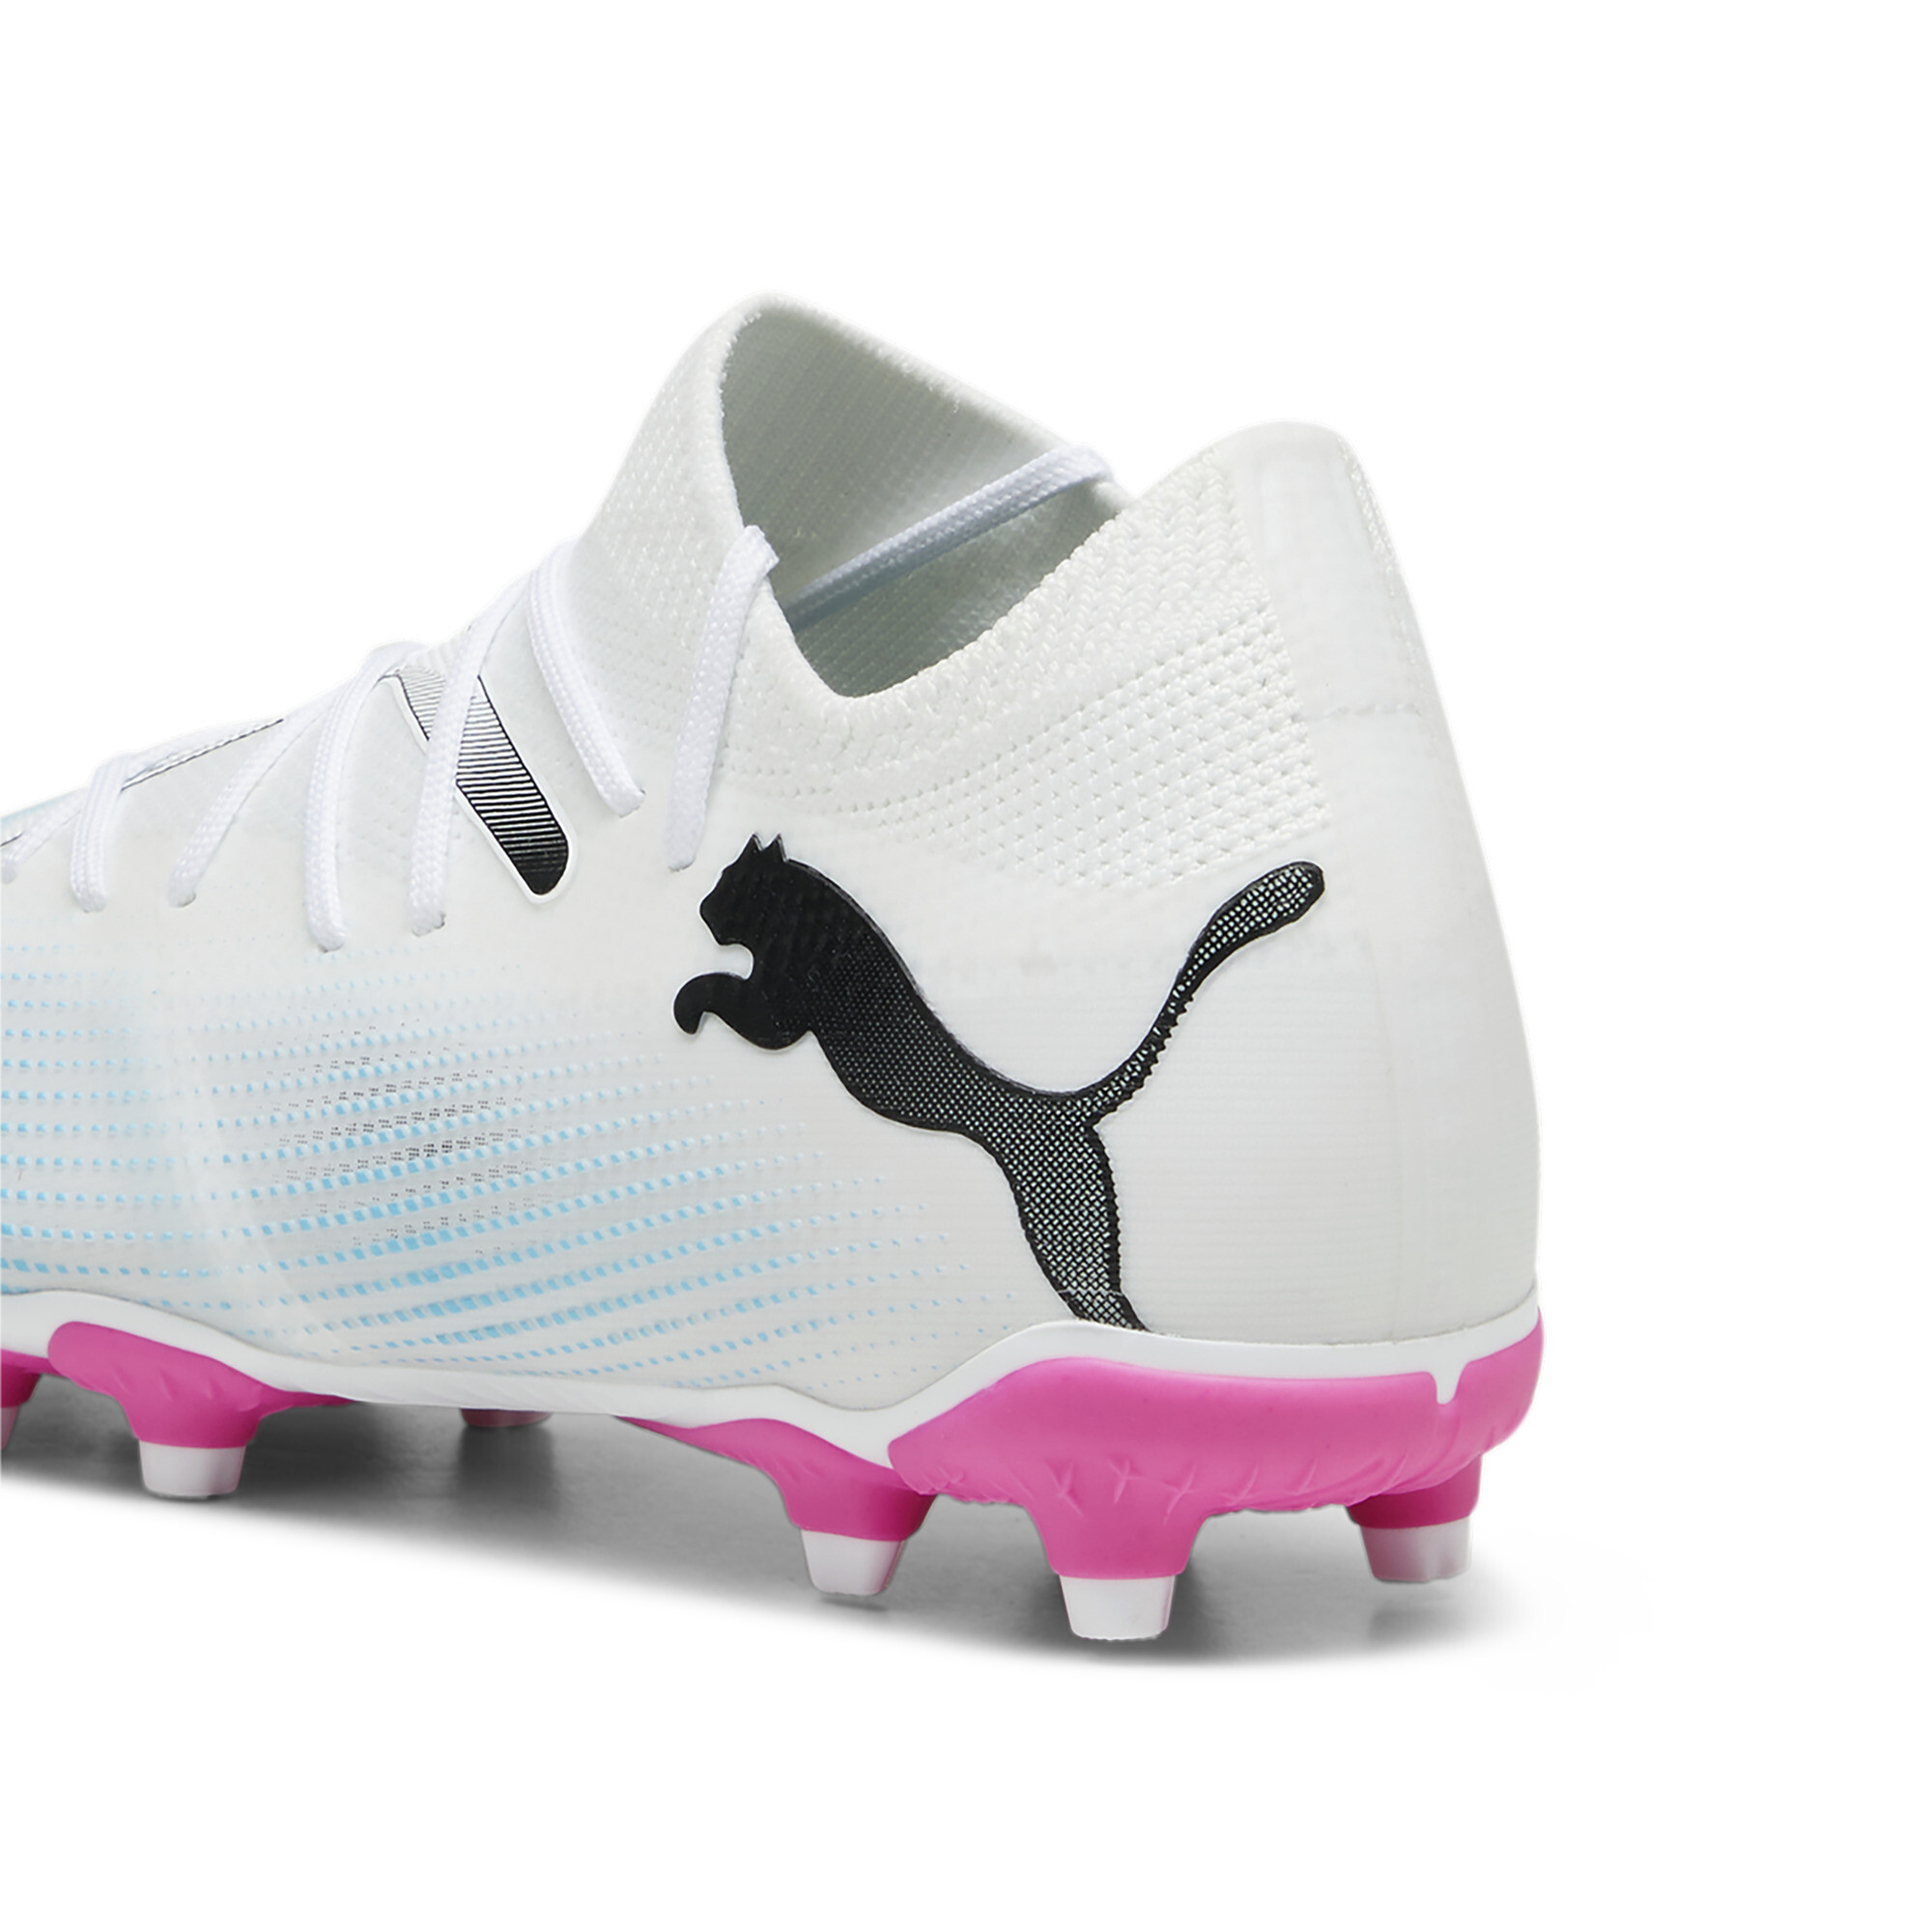 PUMA FUTURE 7 MATCH FG/AG Youth Football Boots In White/Pink, Size EU 36